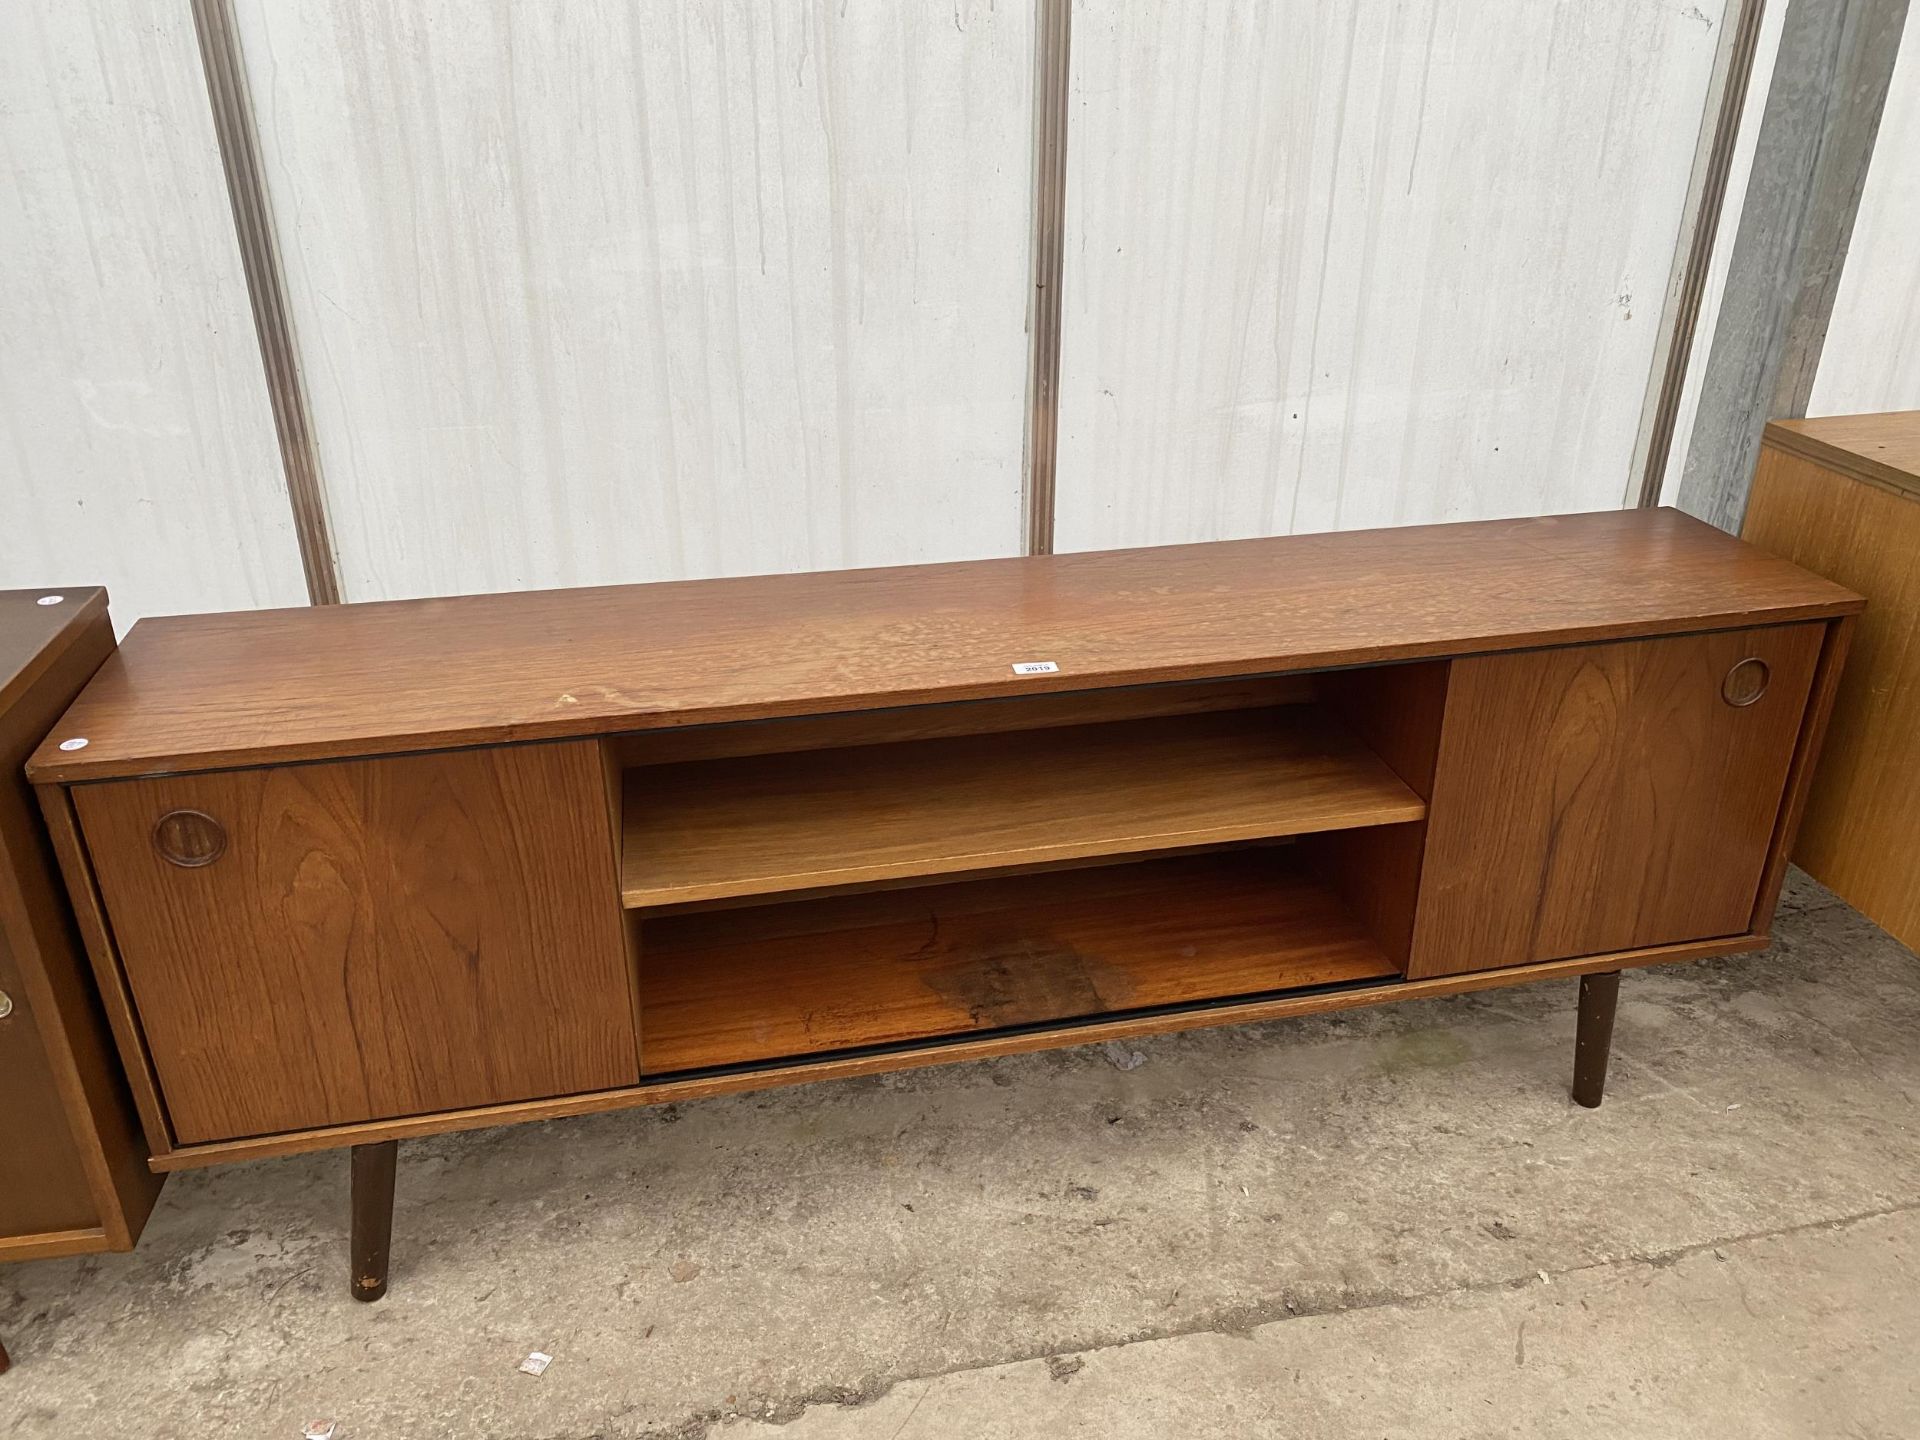 A RETRO TEAK AVALON SIDE CABINET WITH TWO SLIDING DOORS, 64" WIDE